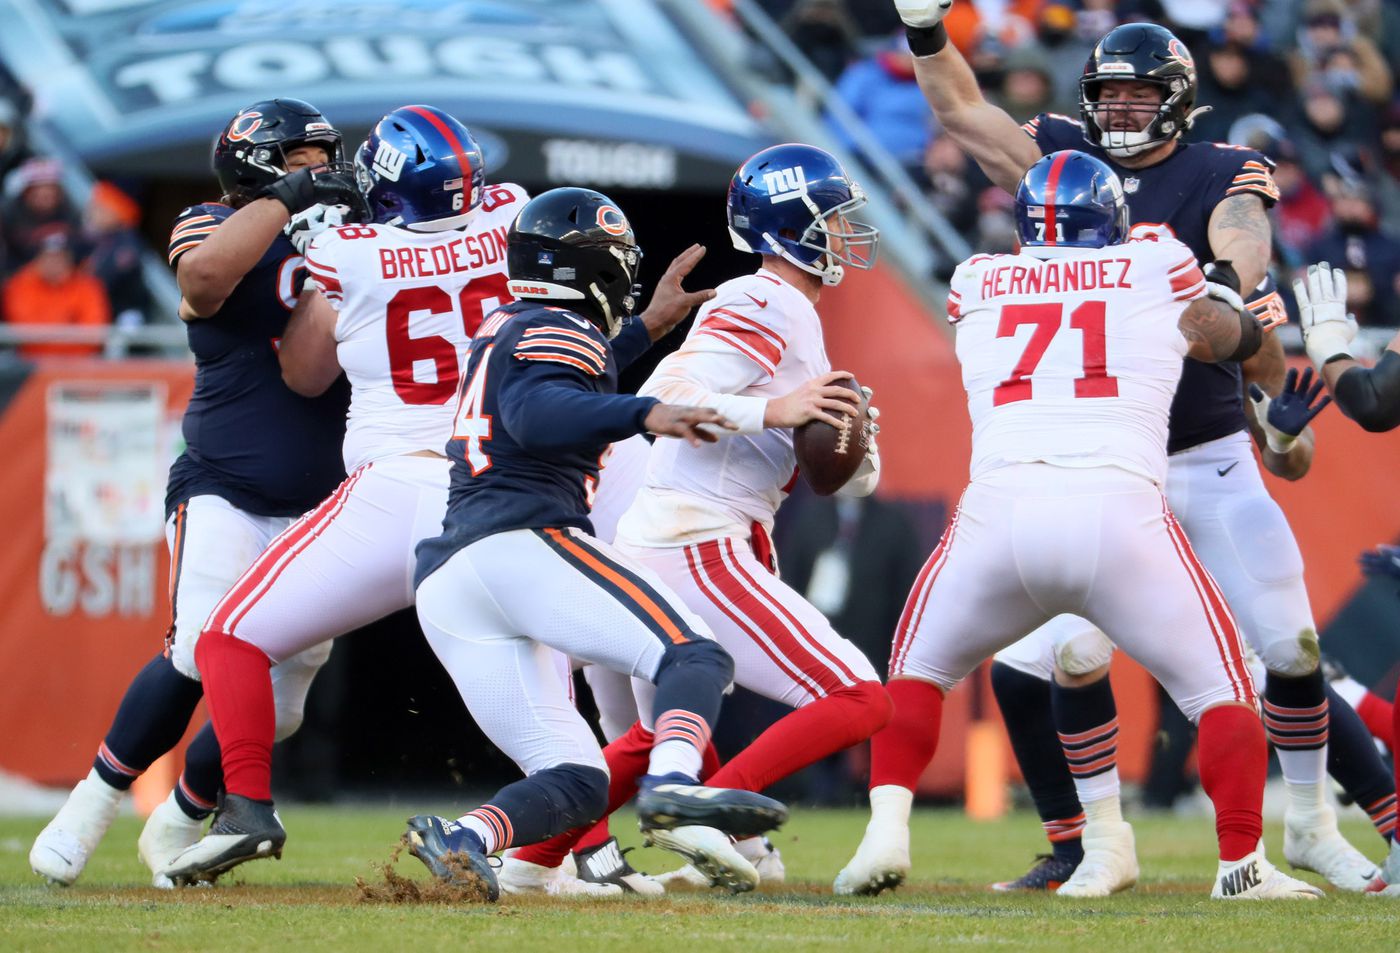 Bears outside linebacker Robert Quinn sacks Giants quarterback Mike Glennon and forces a fumble in the 4th quarter at Soldier Fieeld on Jan. 2, 2022.